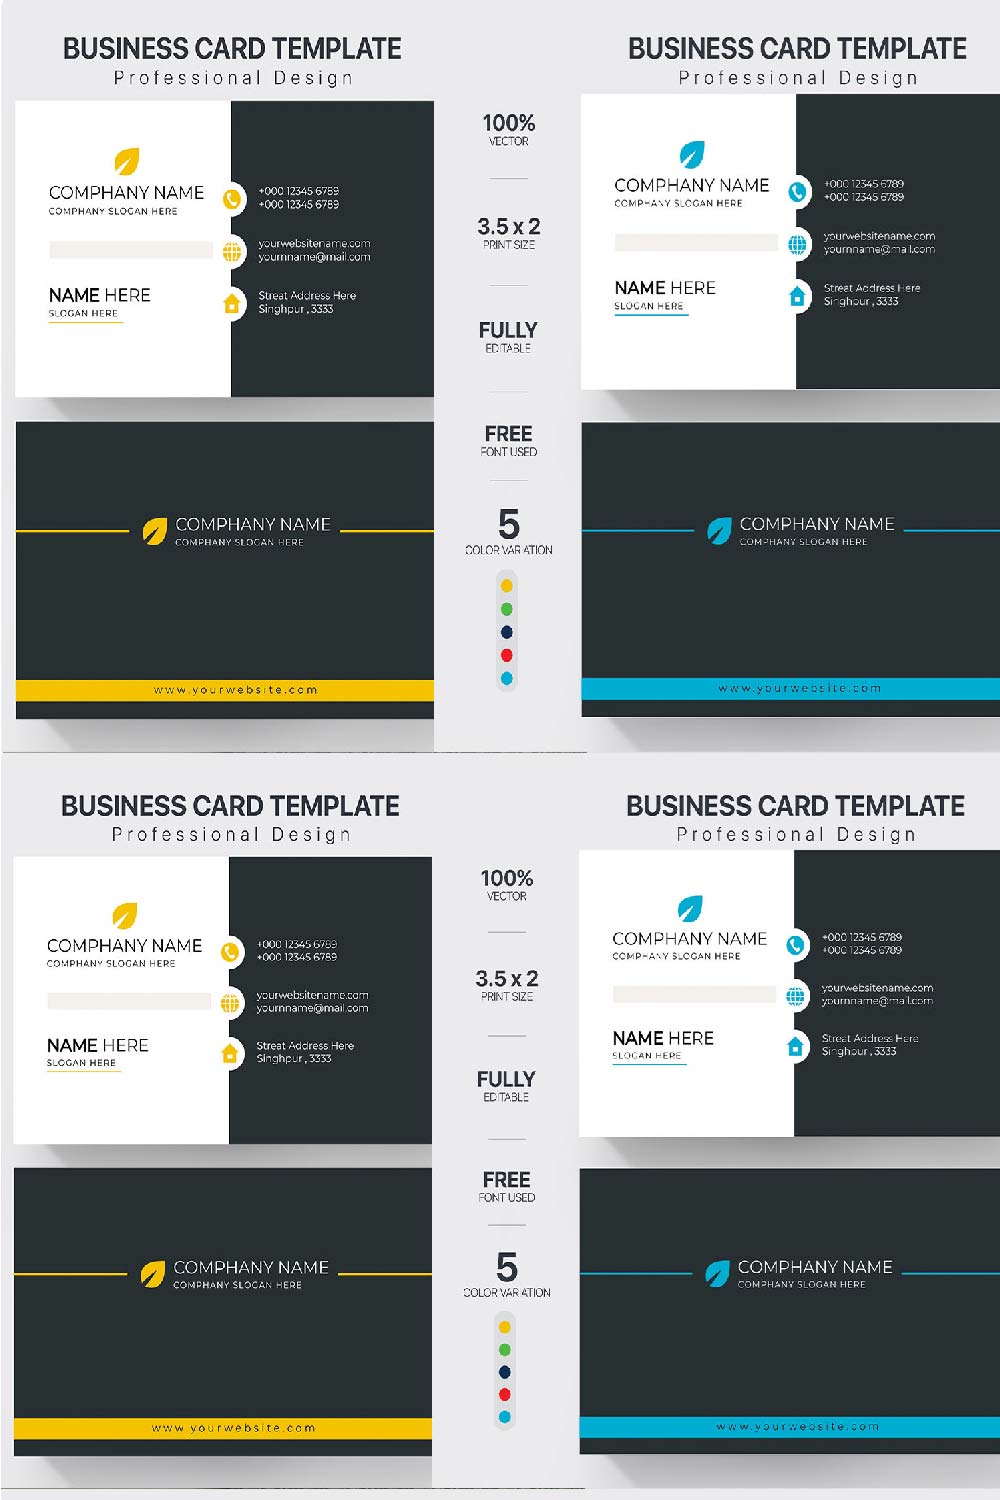 Collection of elegant images of double-sided business card template.